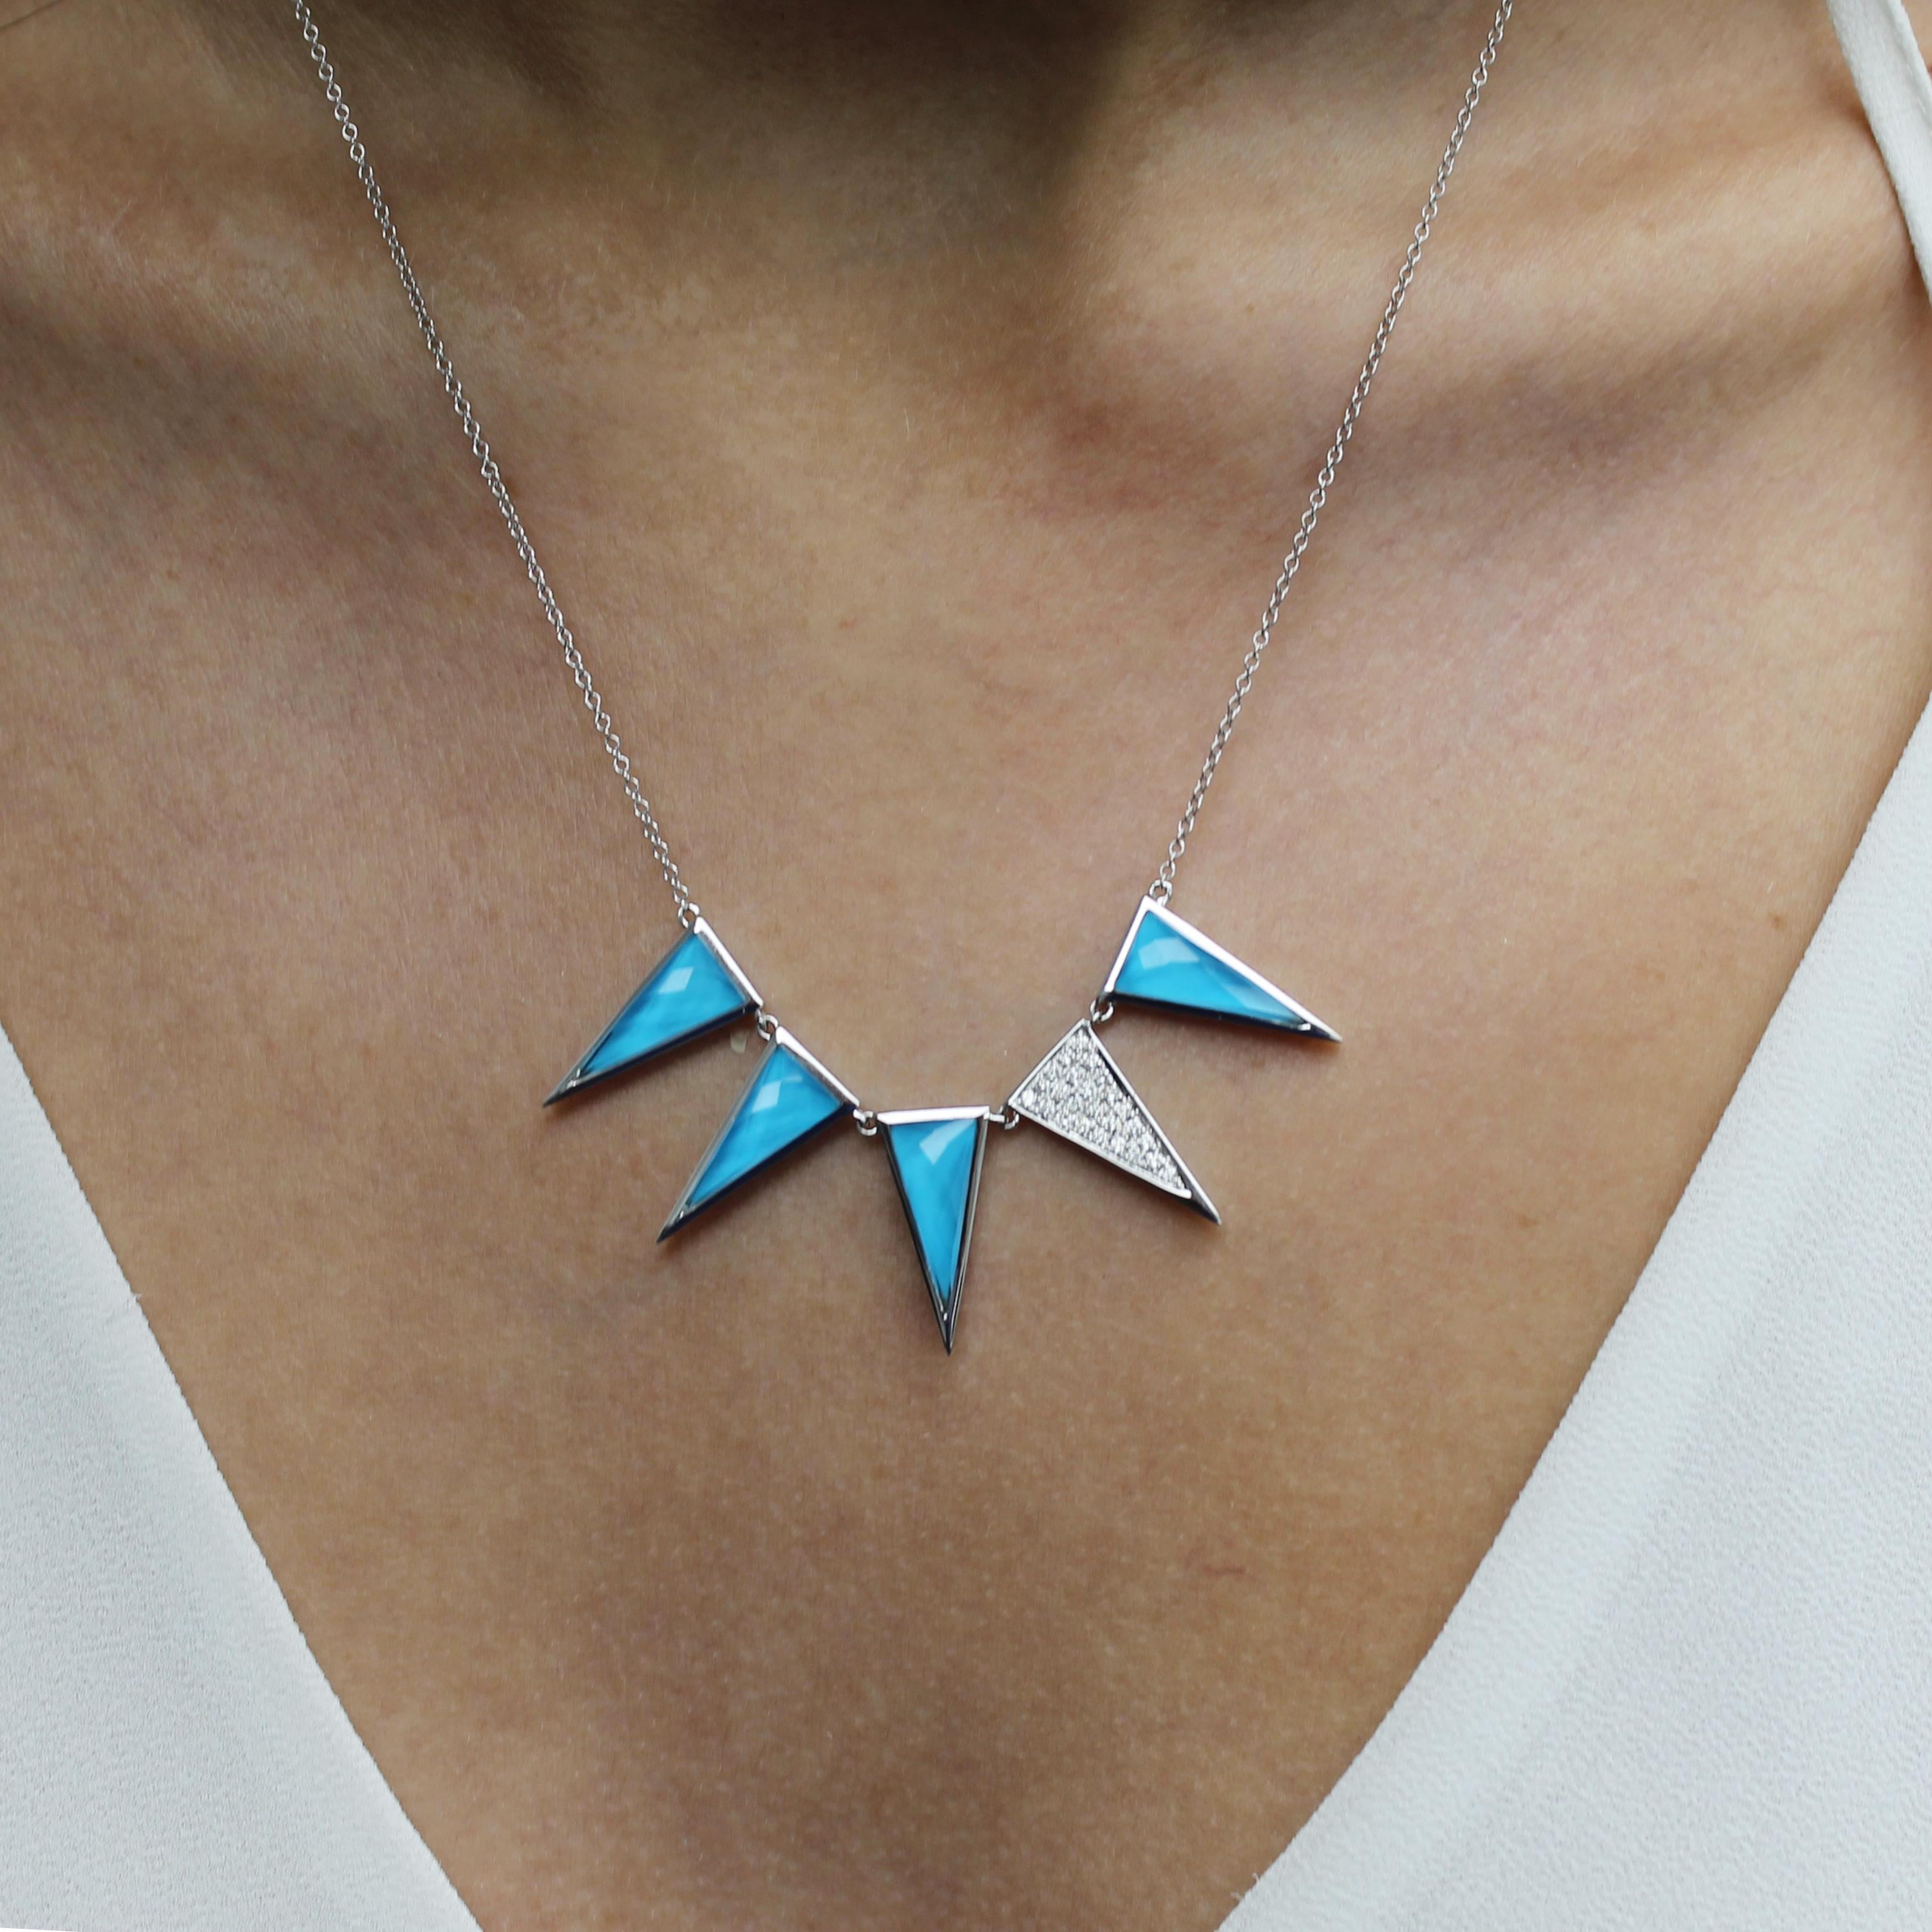 St. Barths Blue Dagger Necklace featuring (4) triangle stations of checker-cut, White Topaz layered with Natural Arizona Turquoise, and (1) Pave Diamond triangle, set in 18K white gold. Chain length is 18